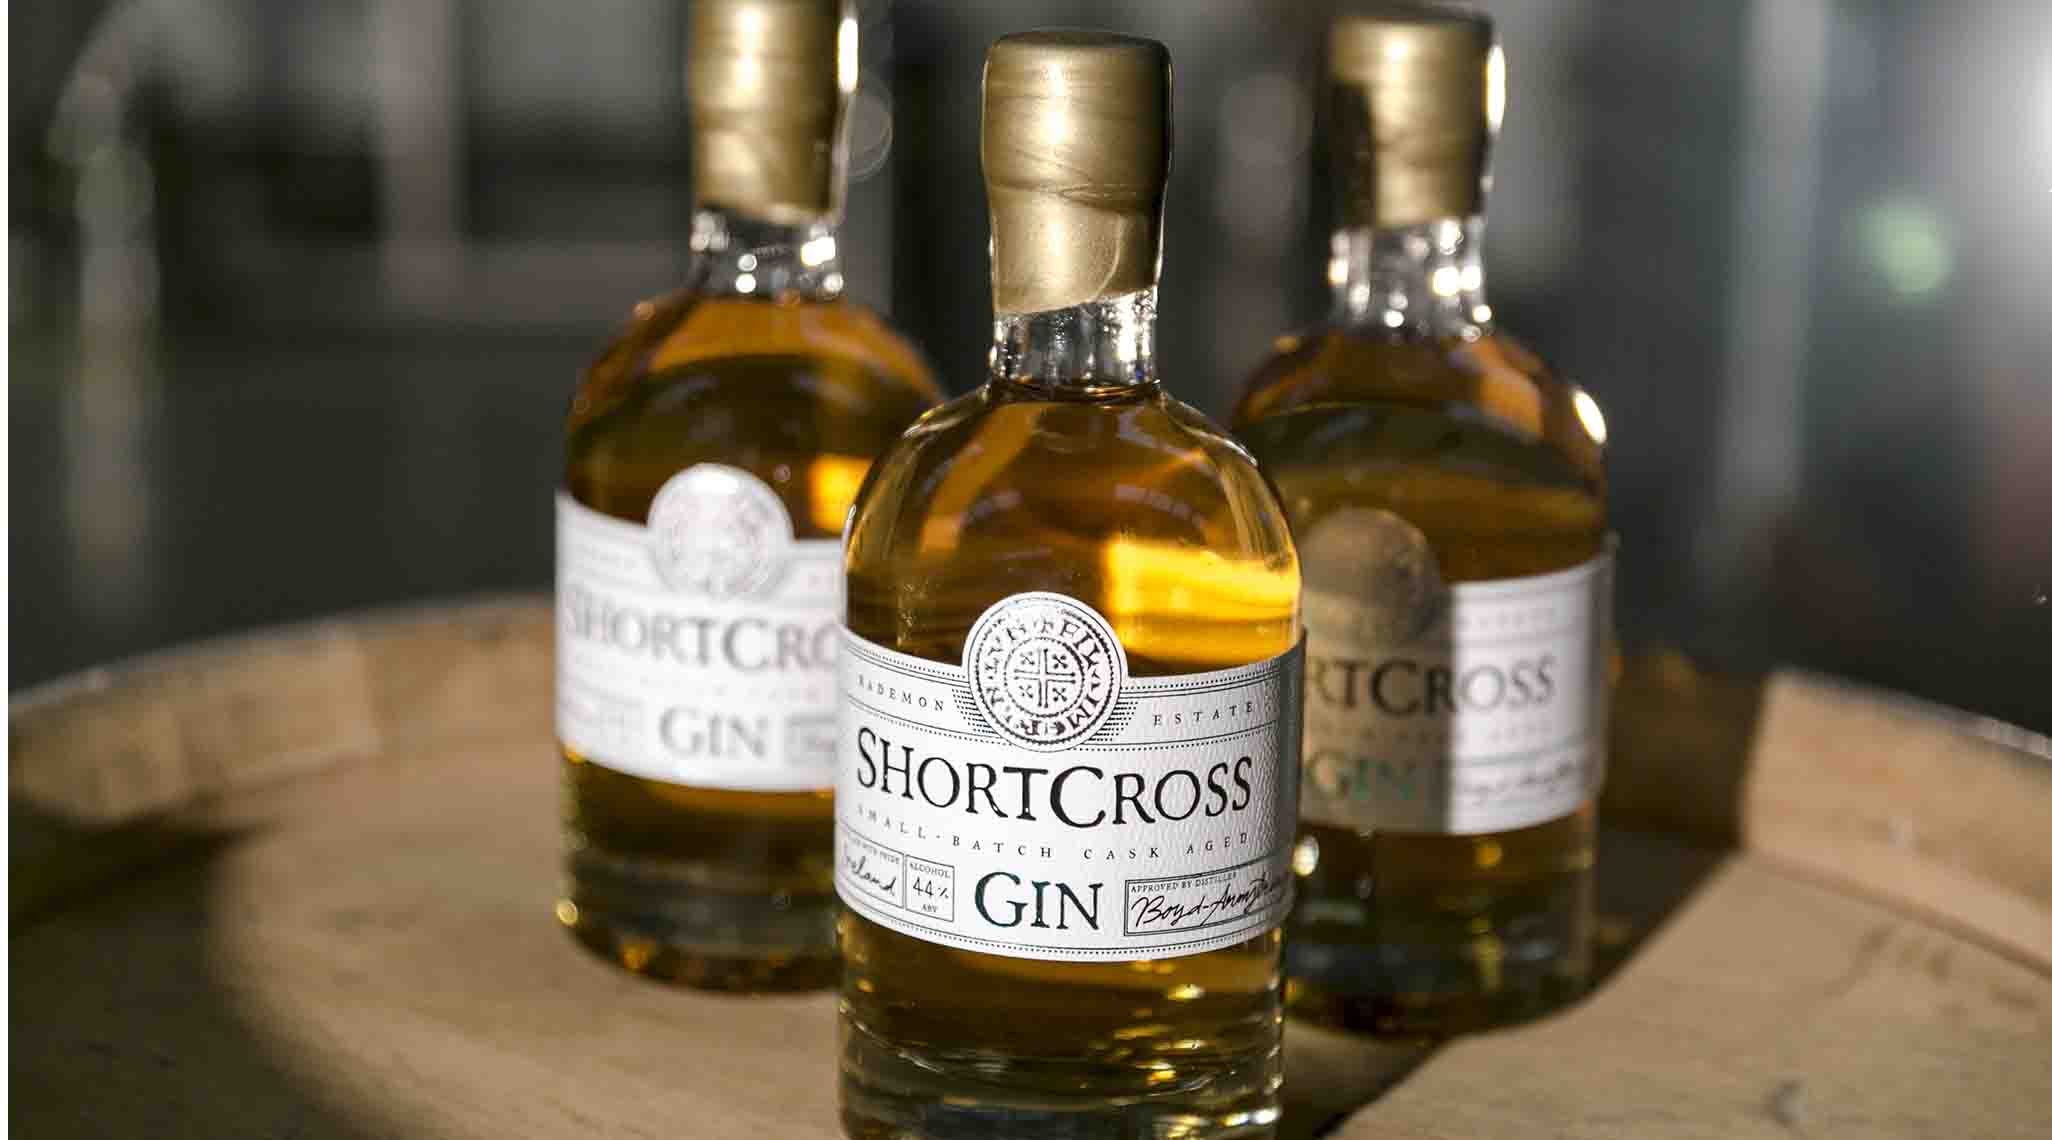 Shortcross Cask Aged Gin is on limited release.